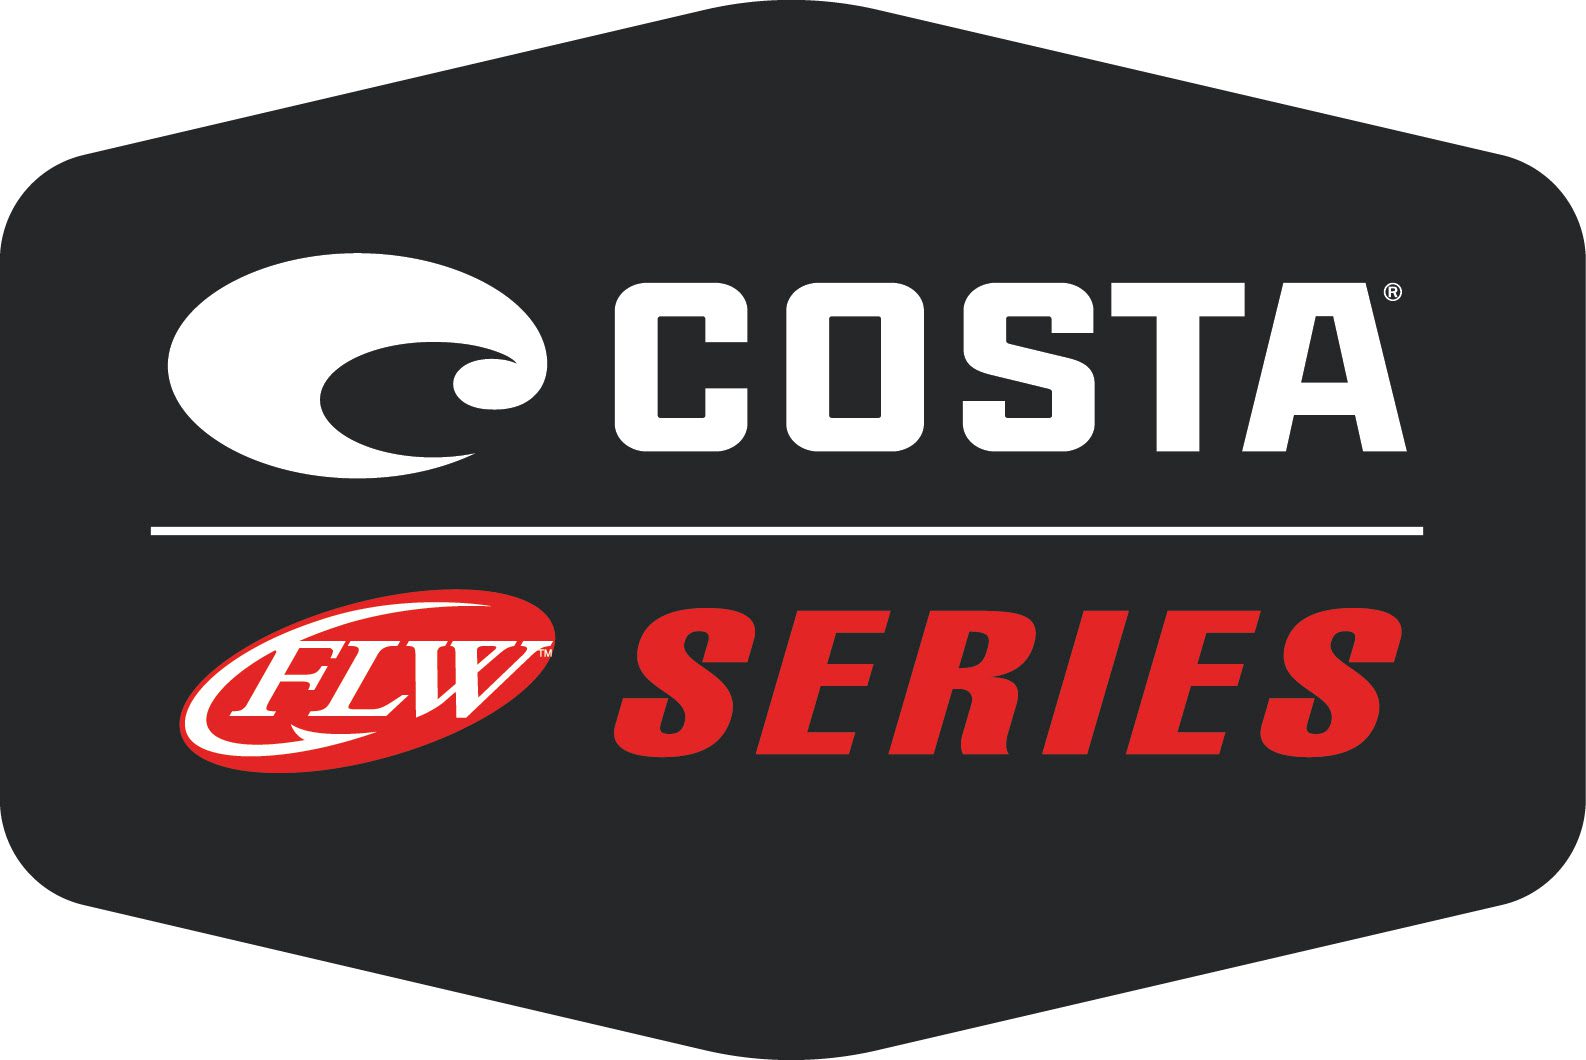 DAY ONE OF COMPETITION CANCELED AT COSTA FLW SERIES ON LAKE AMISTAD DUE TO UNSAFE CONDITIONS